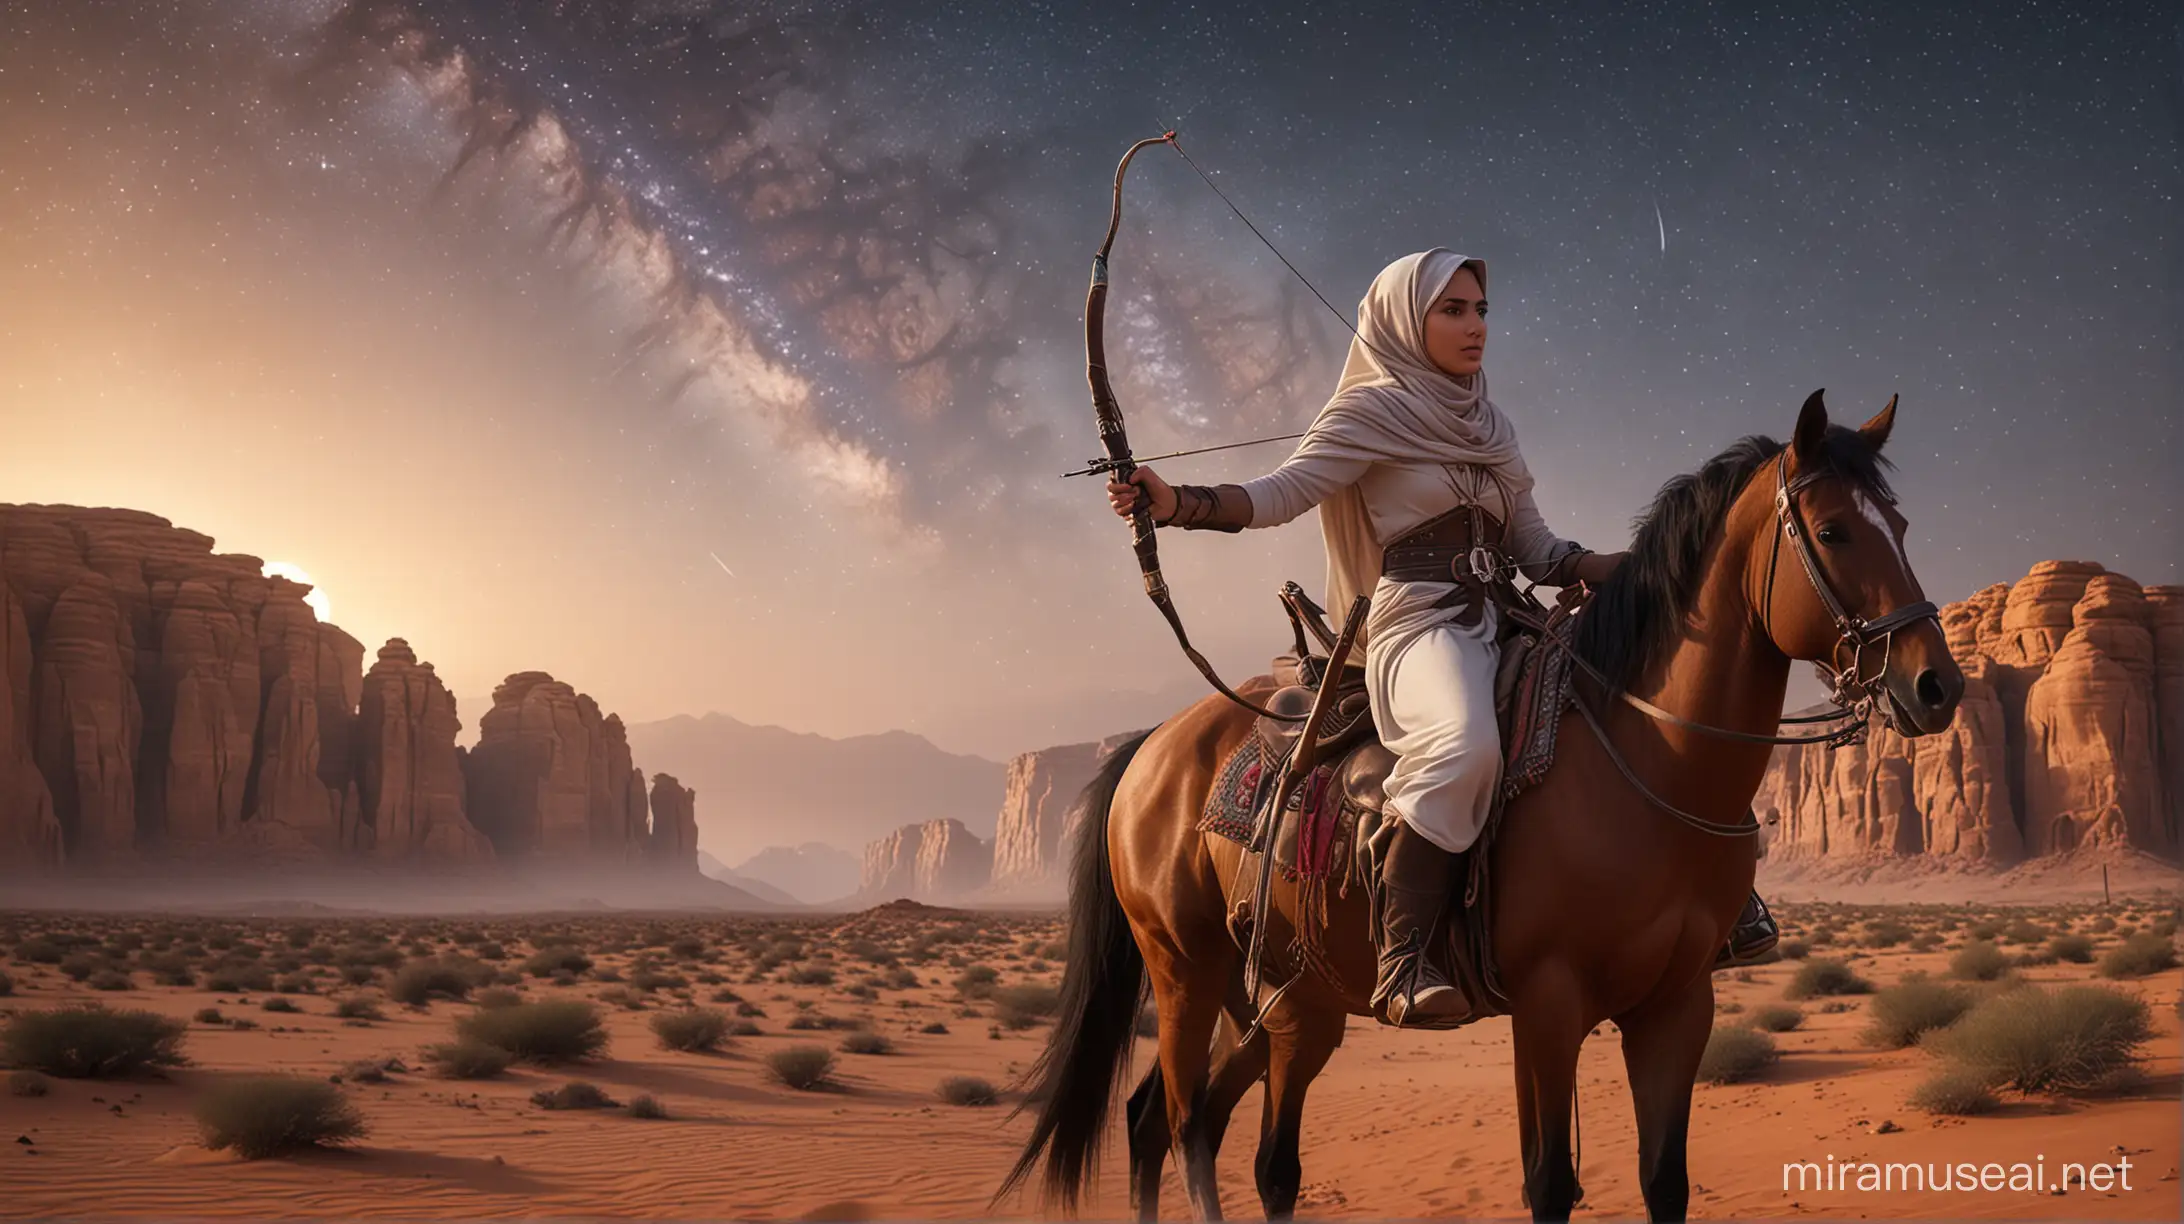 Arabic Woman in Hijab Riding Horse with Archery in Majestic Desert Landscape